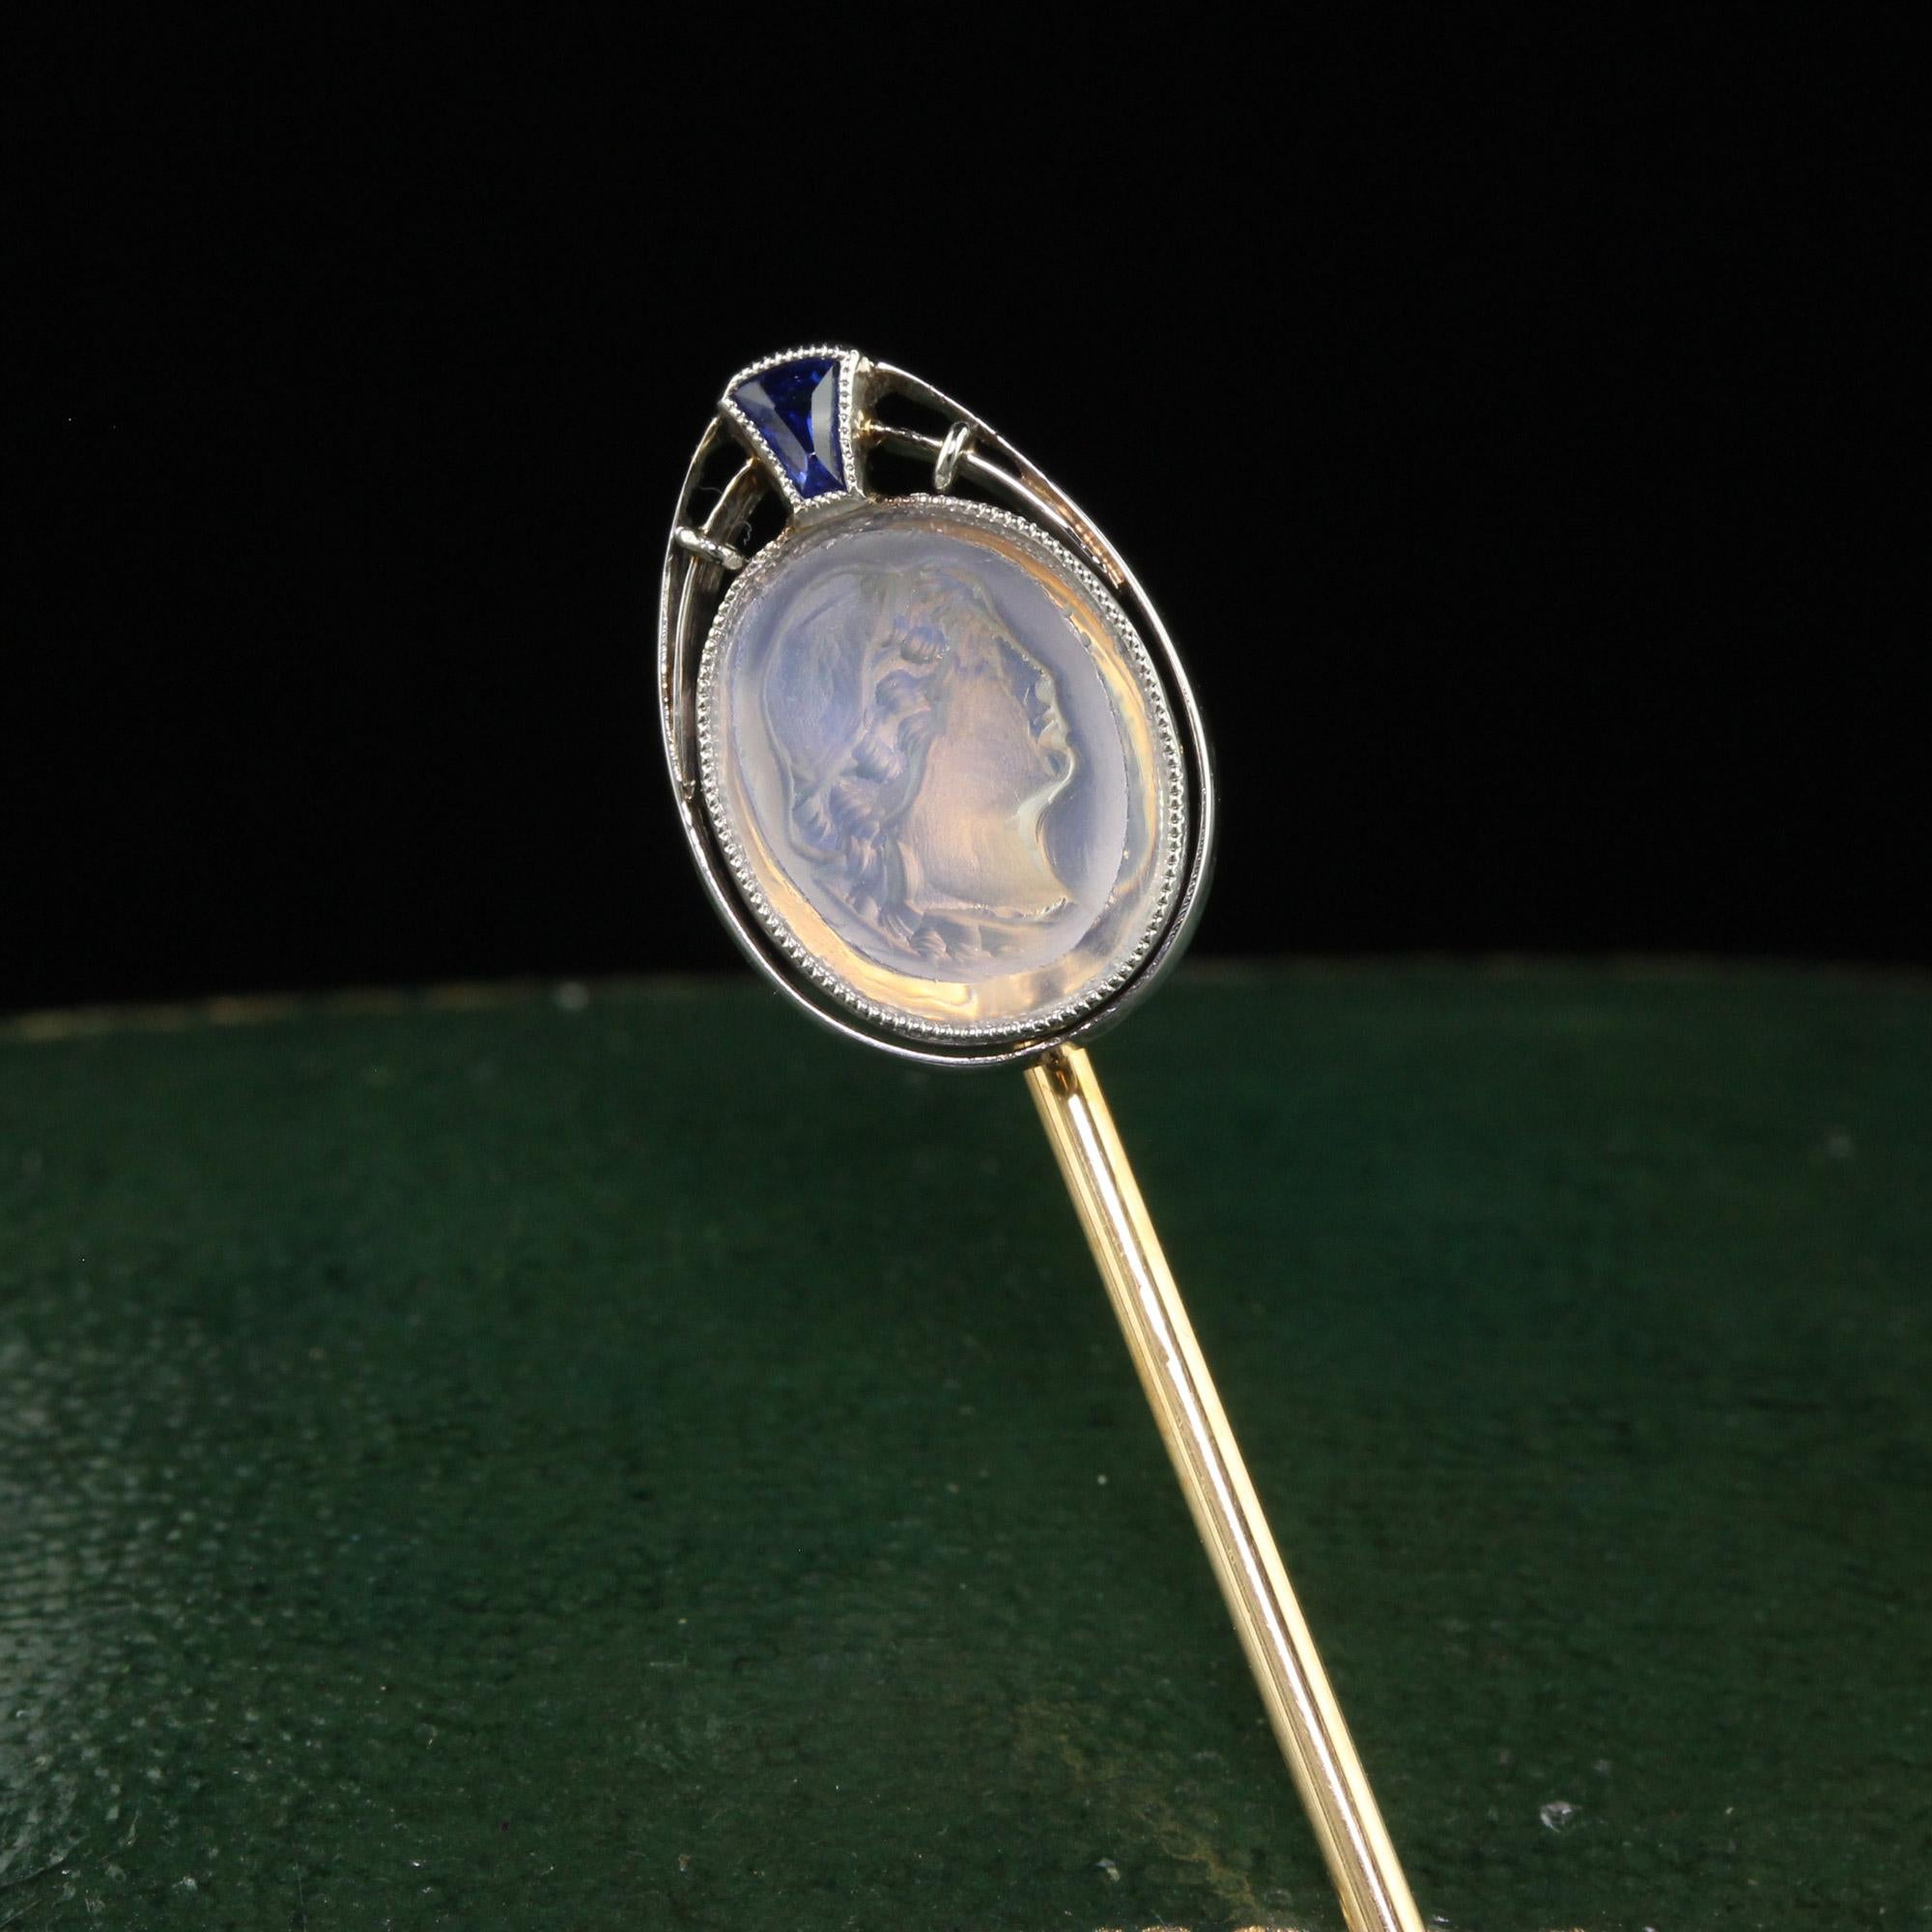 Beautiful Antique Art Deco 14K Yellow Gold Platinum Carved Moonstone Lady Stick Pin. This incredible Art Deco stick pin is crafted in 18k yellow gold and platinum. This pin features a portrait of a lady carved out of moonstone and has a synthetic